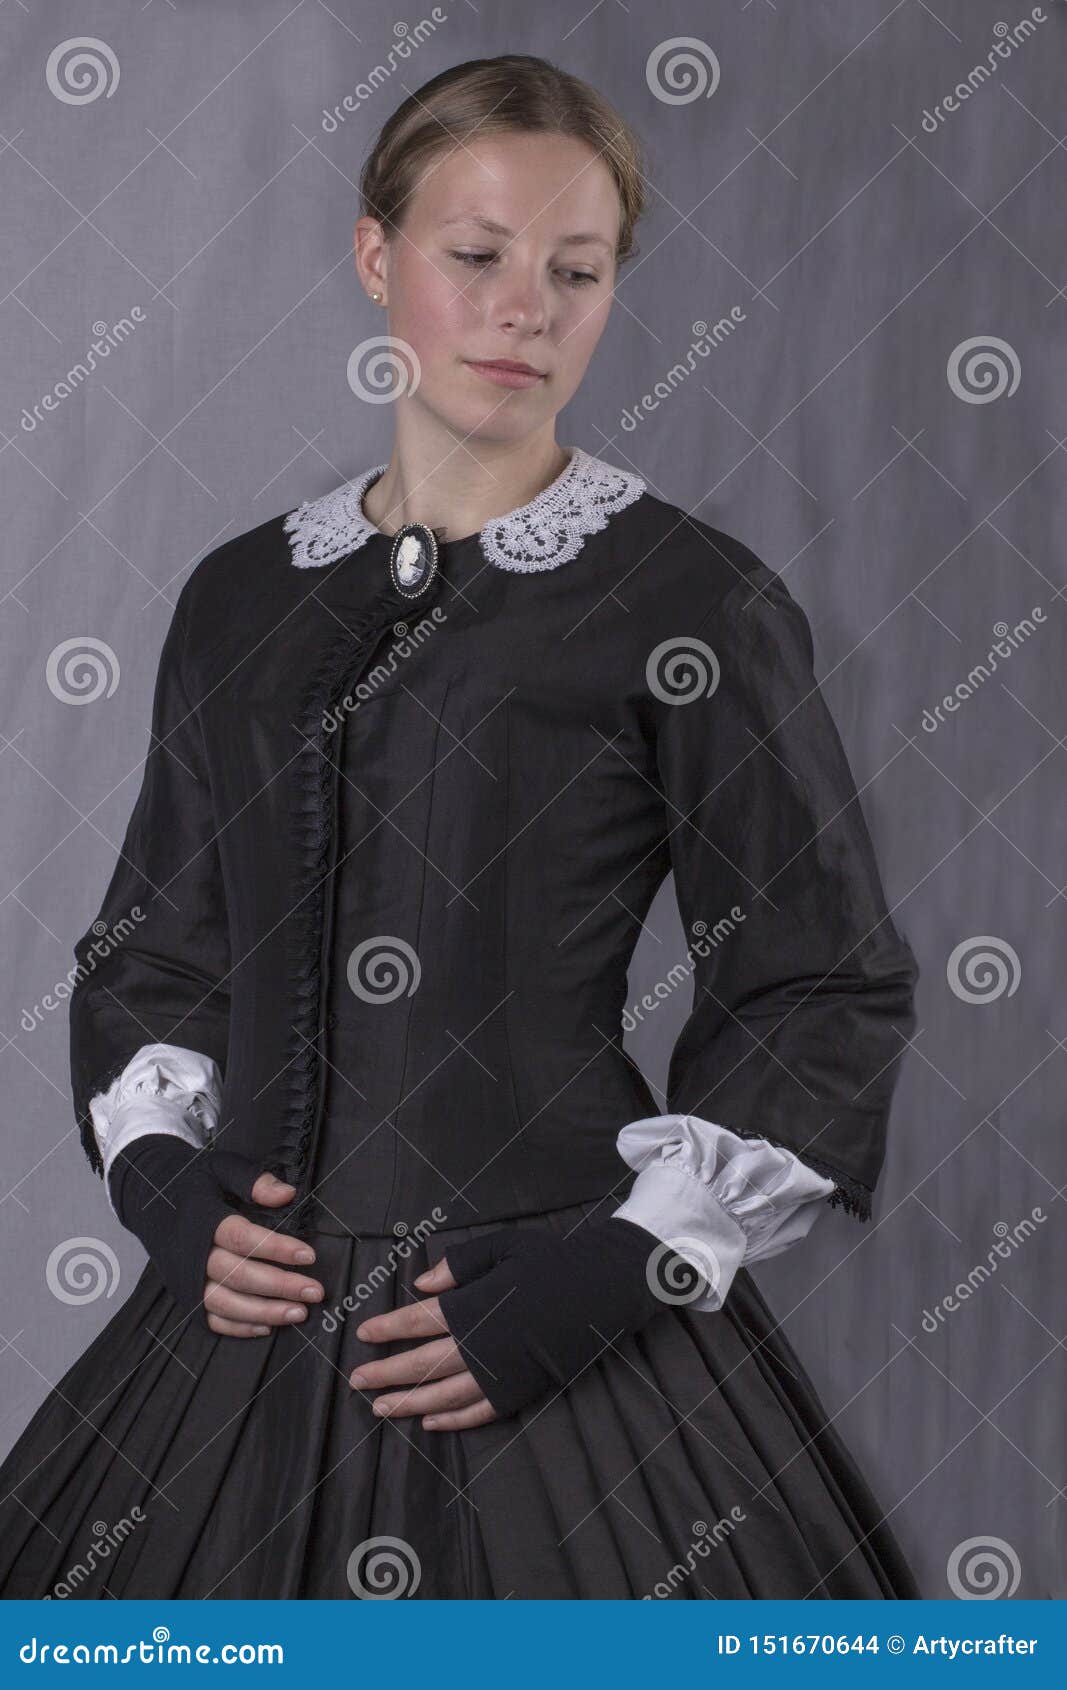 victorian woman in black bodice and skirt